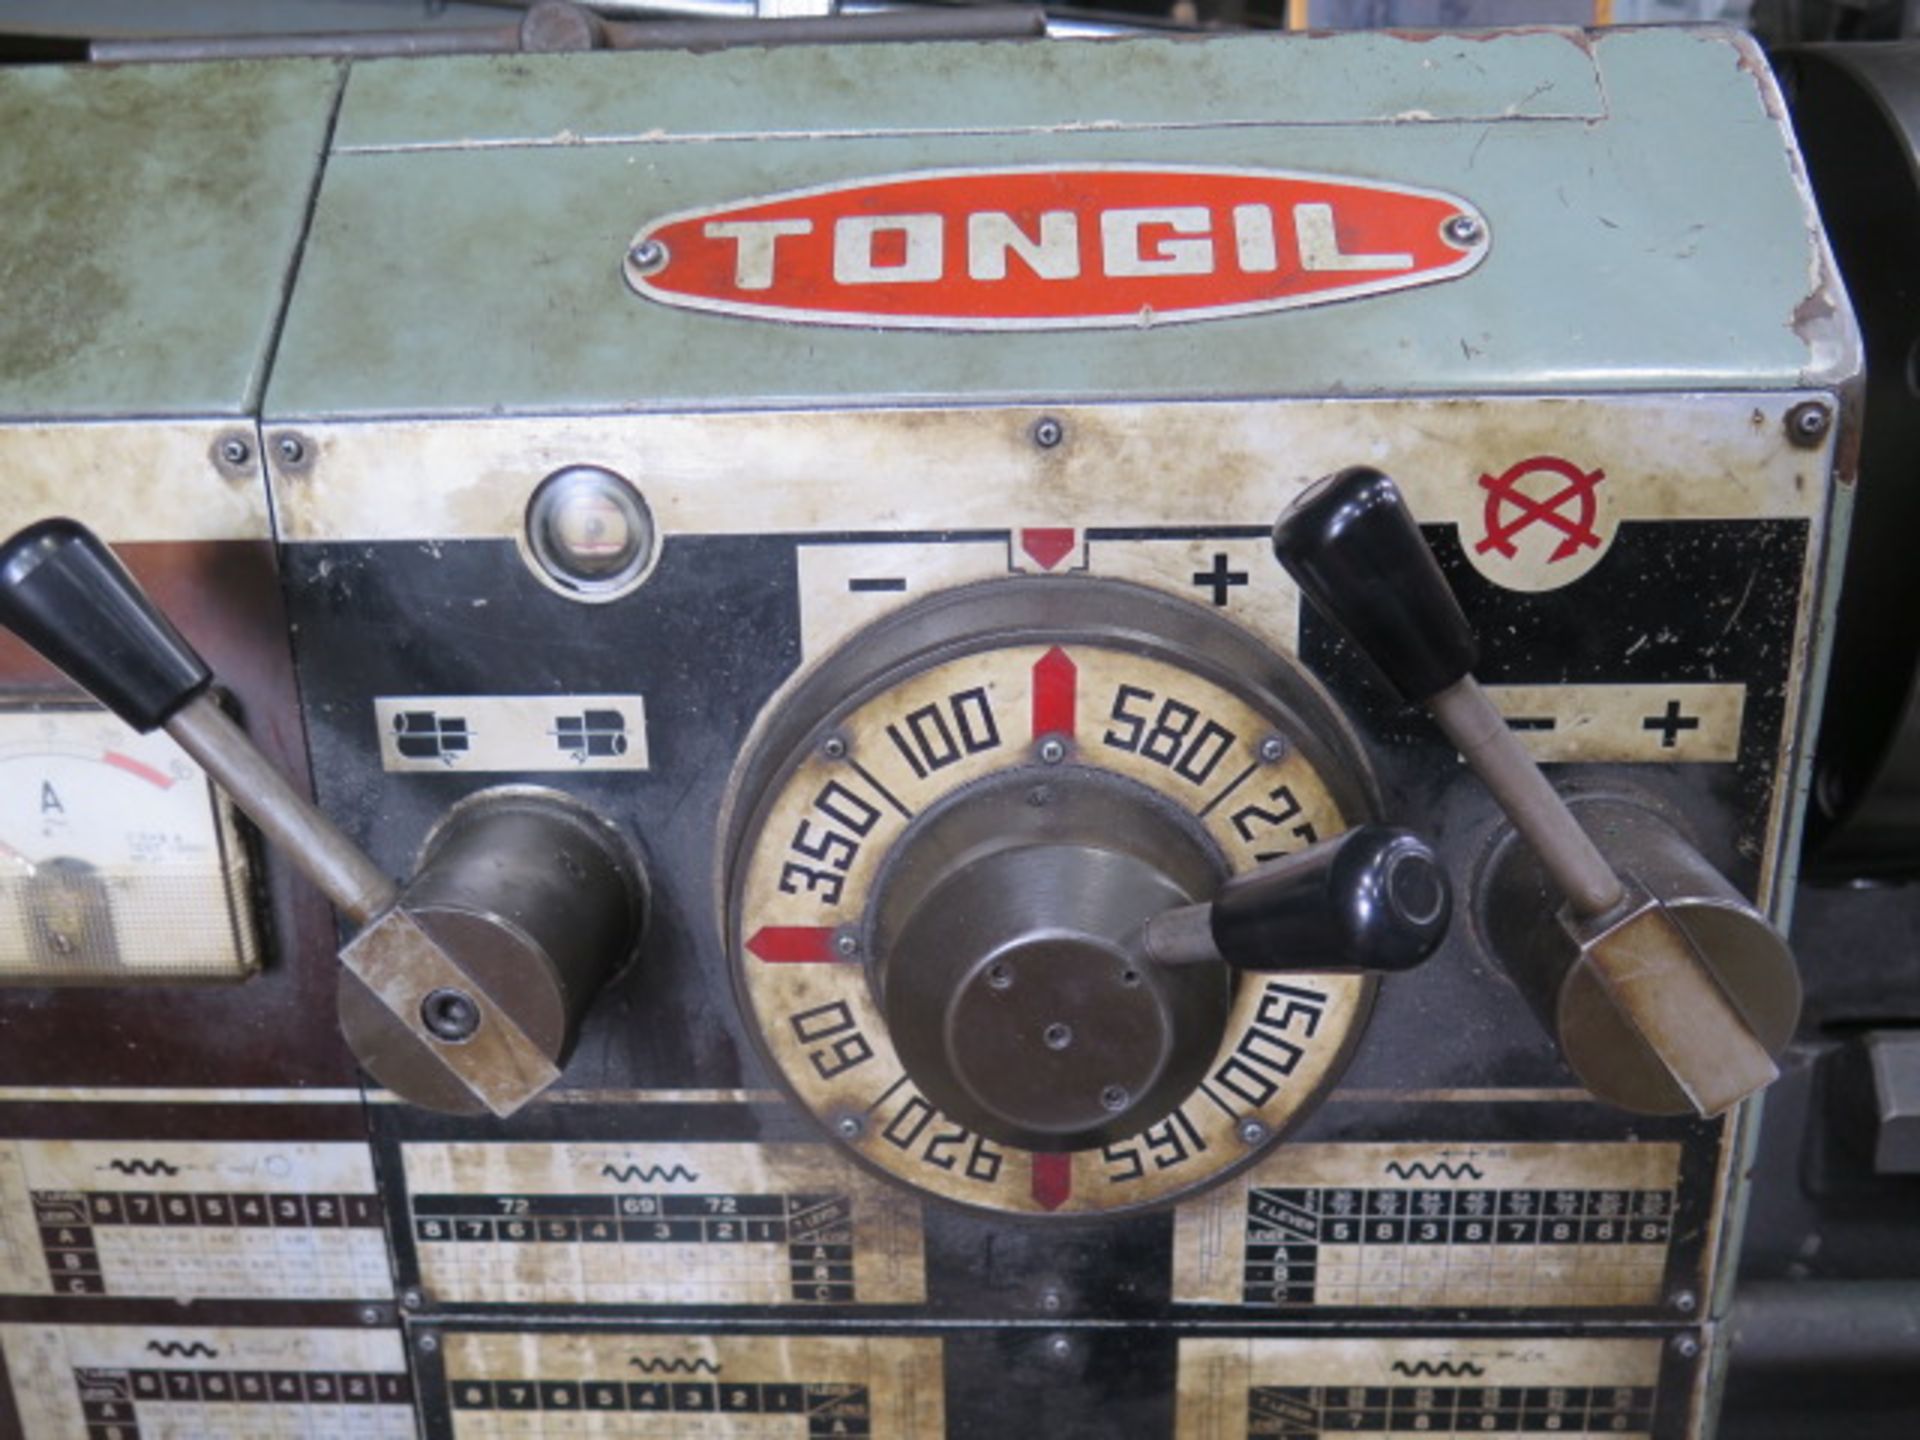 Tongil TIPL-4 15” x 42” Geared Head Gap Bed Lathe w/ 60-1500 RPM, Inch/mm Threading, SOLD AS IS - Image 5 of 12